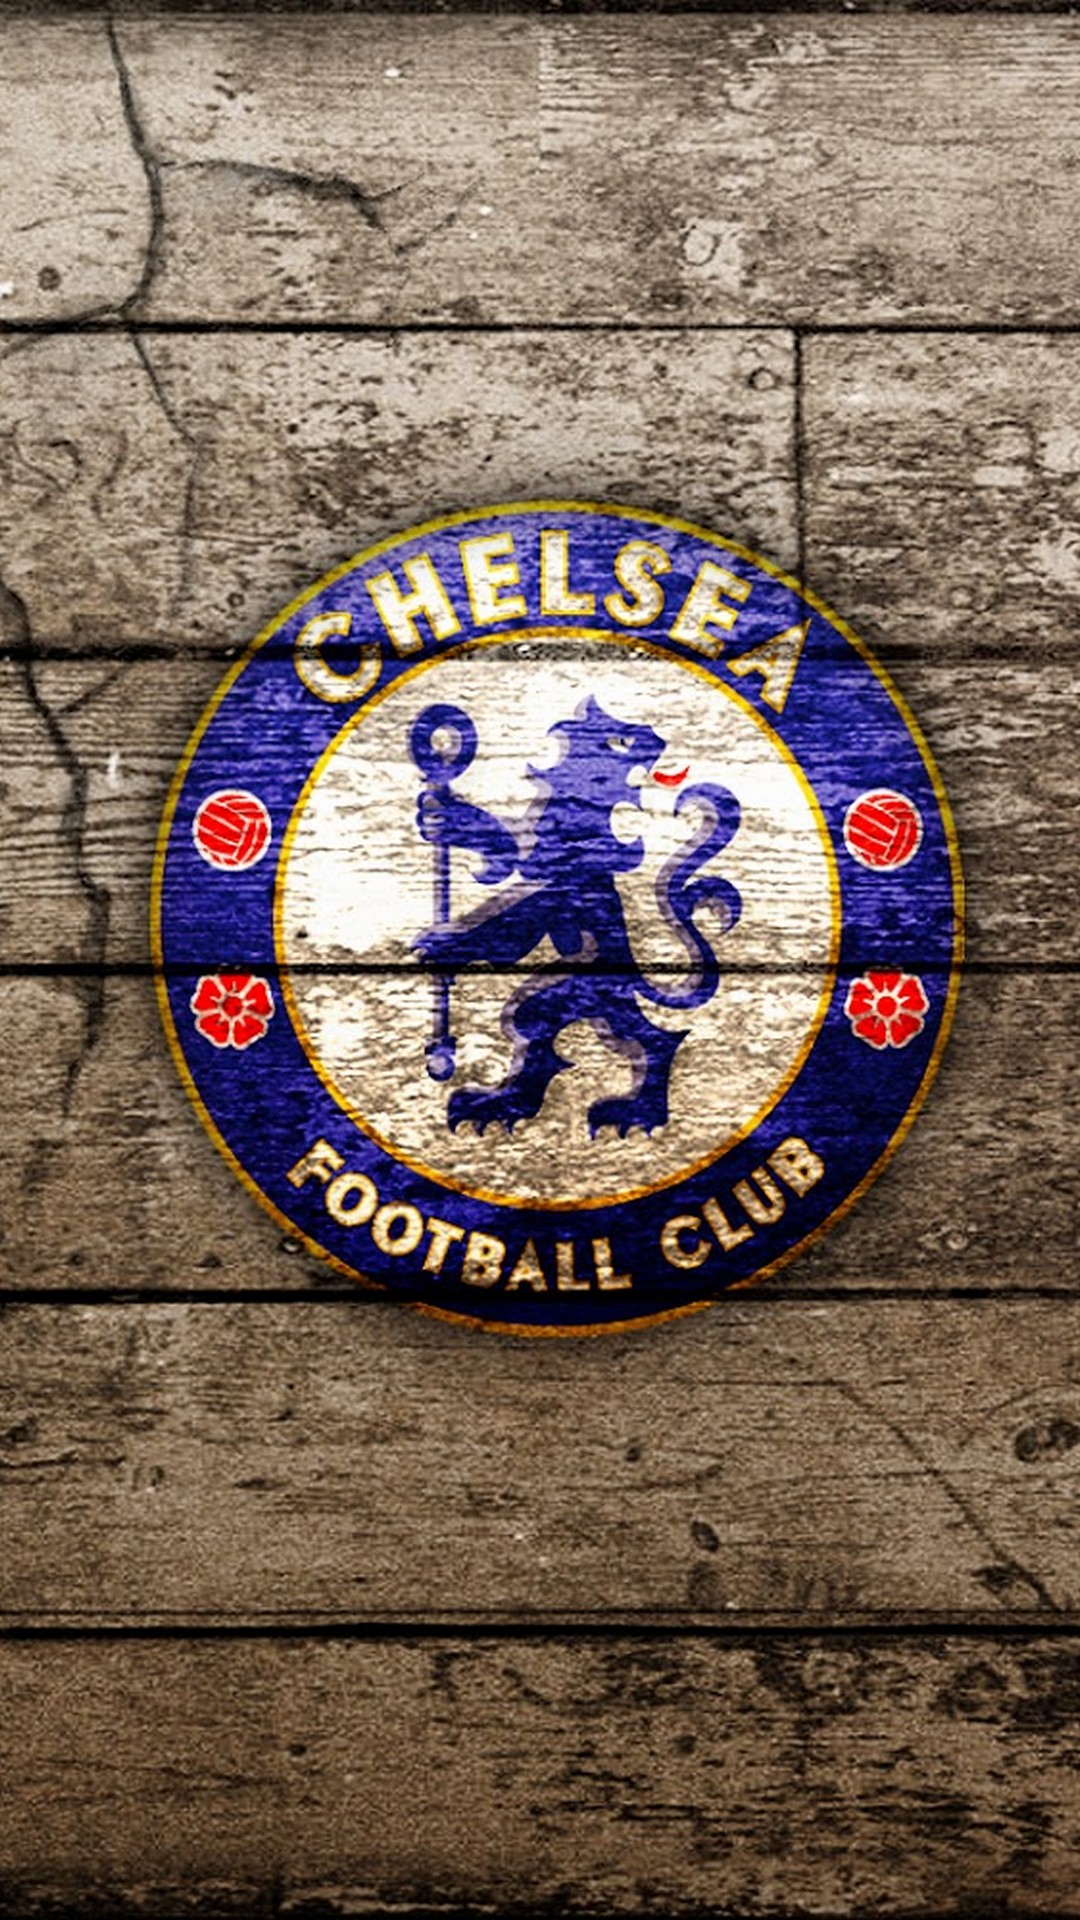 Wallpaper Chelsea FC iPhone With Resolution 1080X1920 pixel. You can make this wallpaper for your Mac or Windows Desktop Background, iPhone, Android or Tablet and another Smartphone device for free